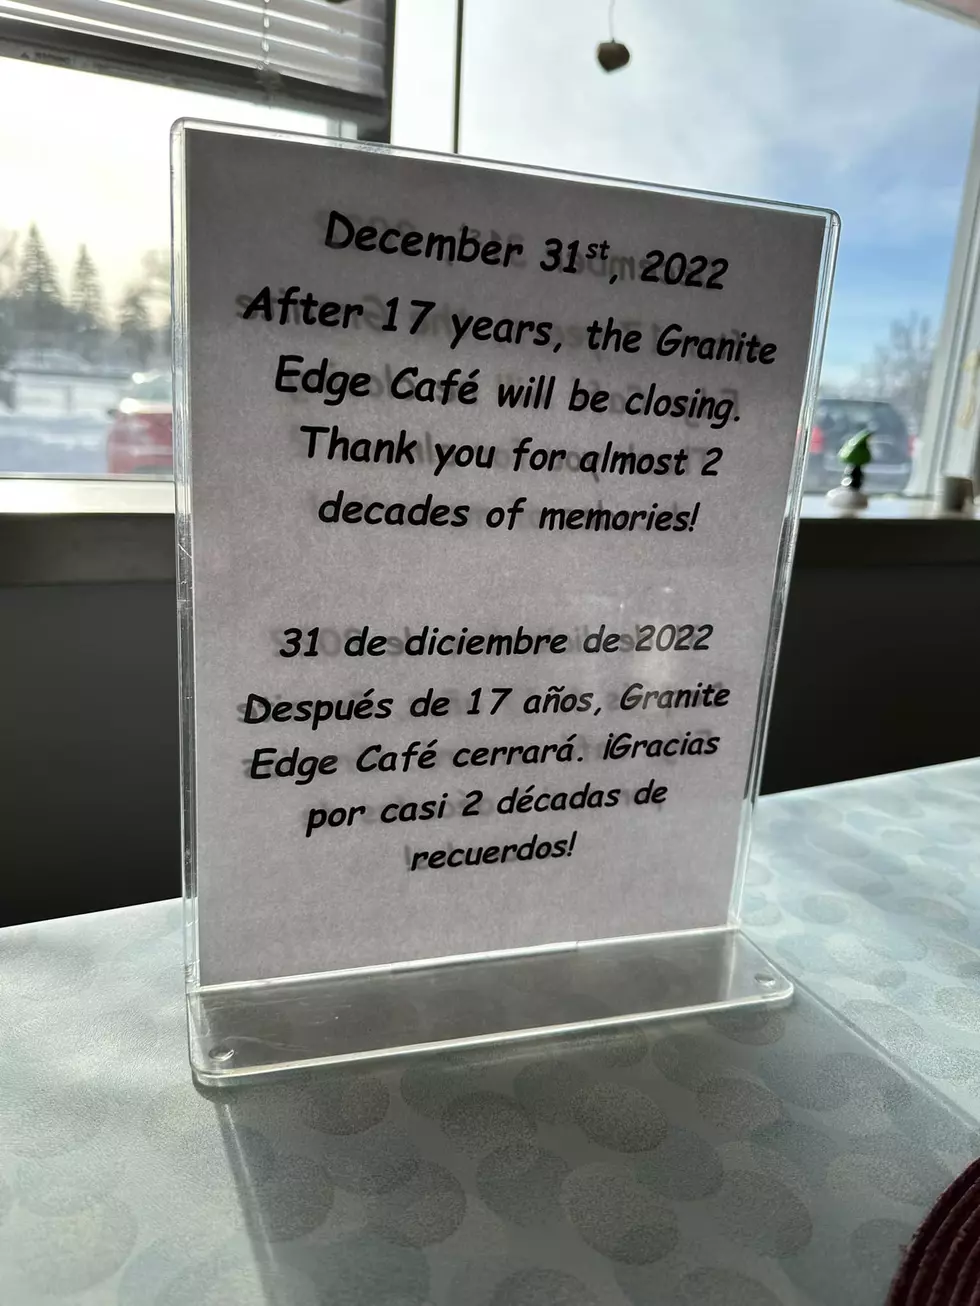 Family Owned Local Cafe Closing After 17 Years in Business